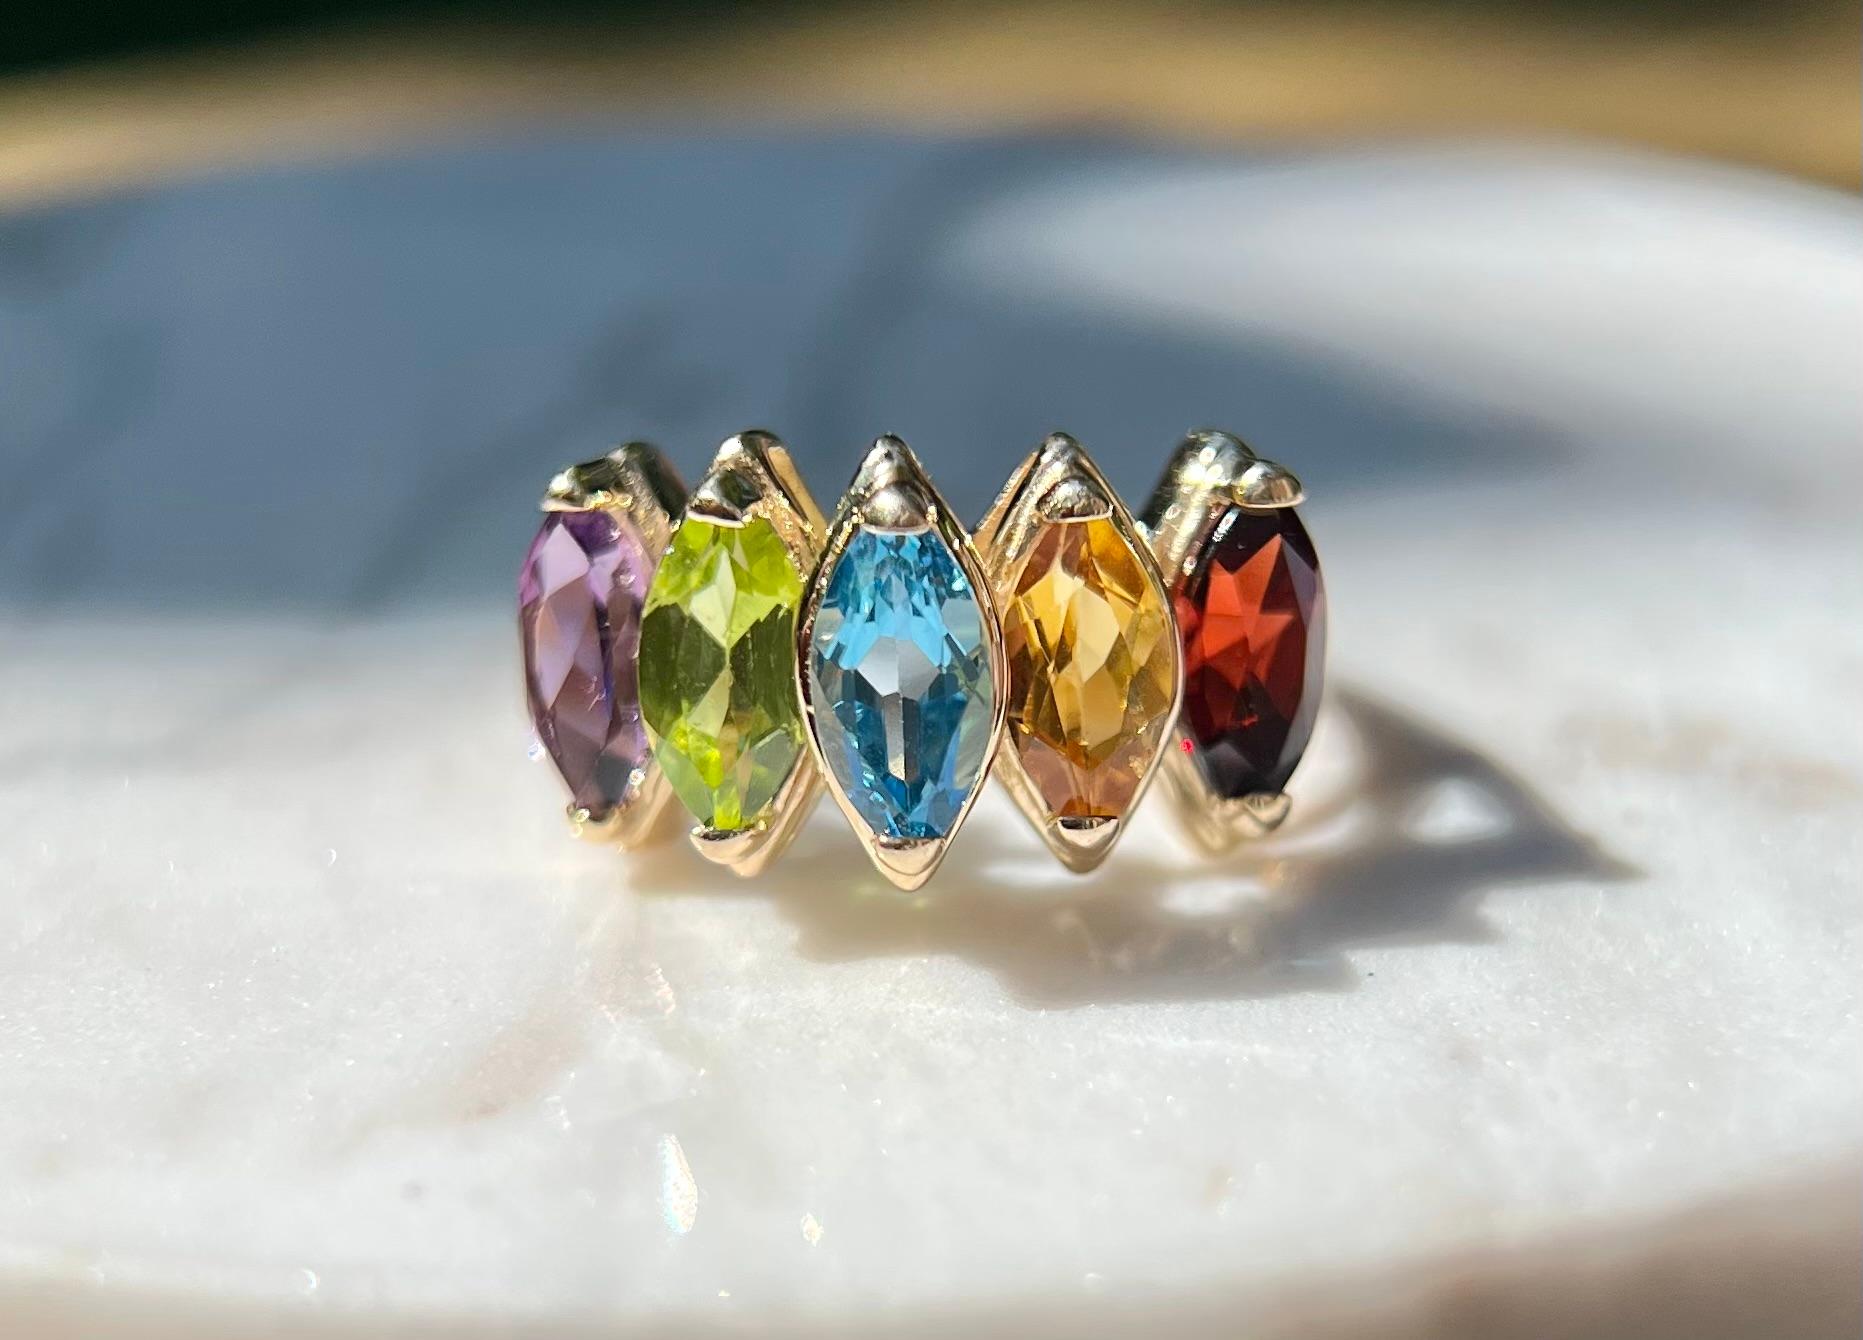 One 14 karat yellow gold five stone ring set with one 7x4mm marquise-cut amethyst, one 7x4 marquise-cut peridot, one 7x4mm marquise-cut blue topaz, one 7x4 citrine, and one 7x4mm garnet stone.  The ring is a finger size 6.5 and is resizable.  